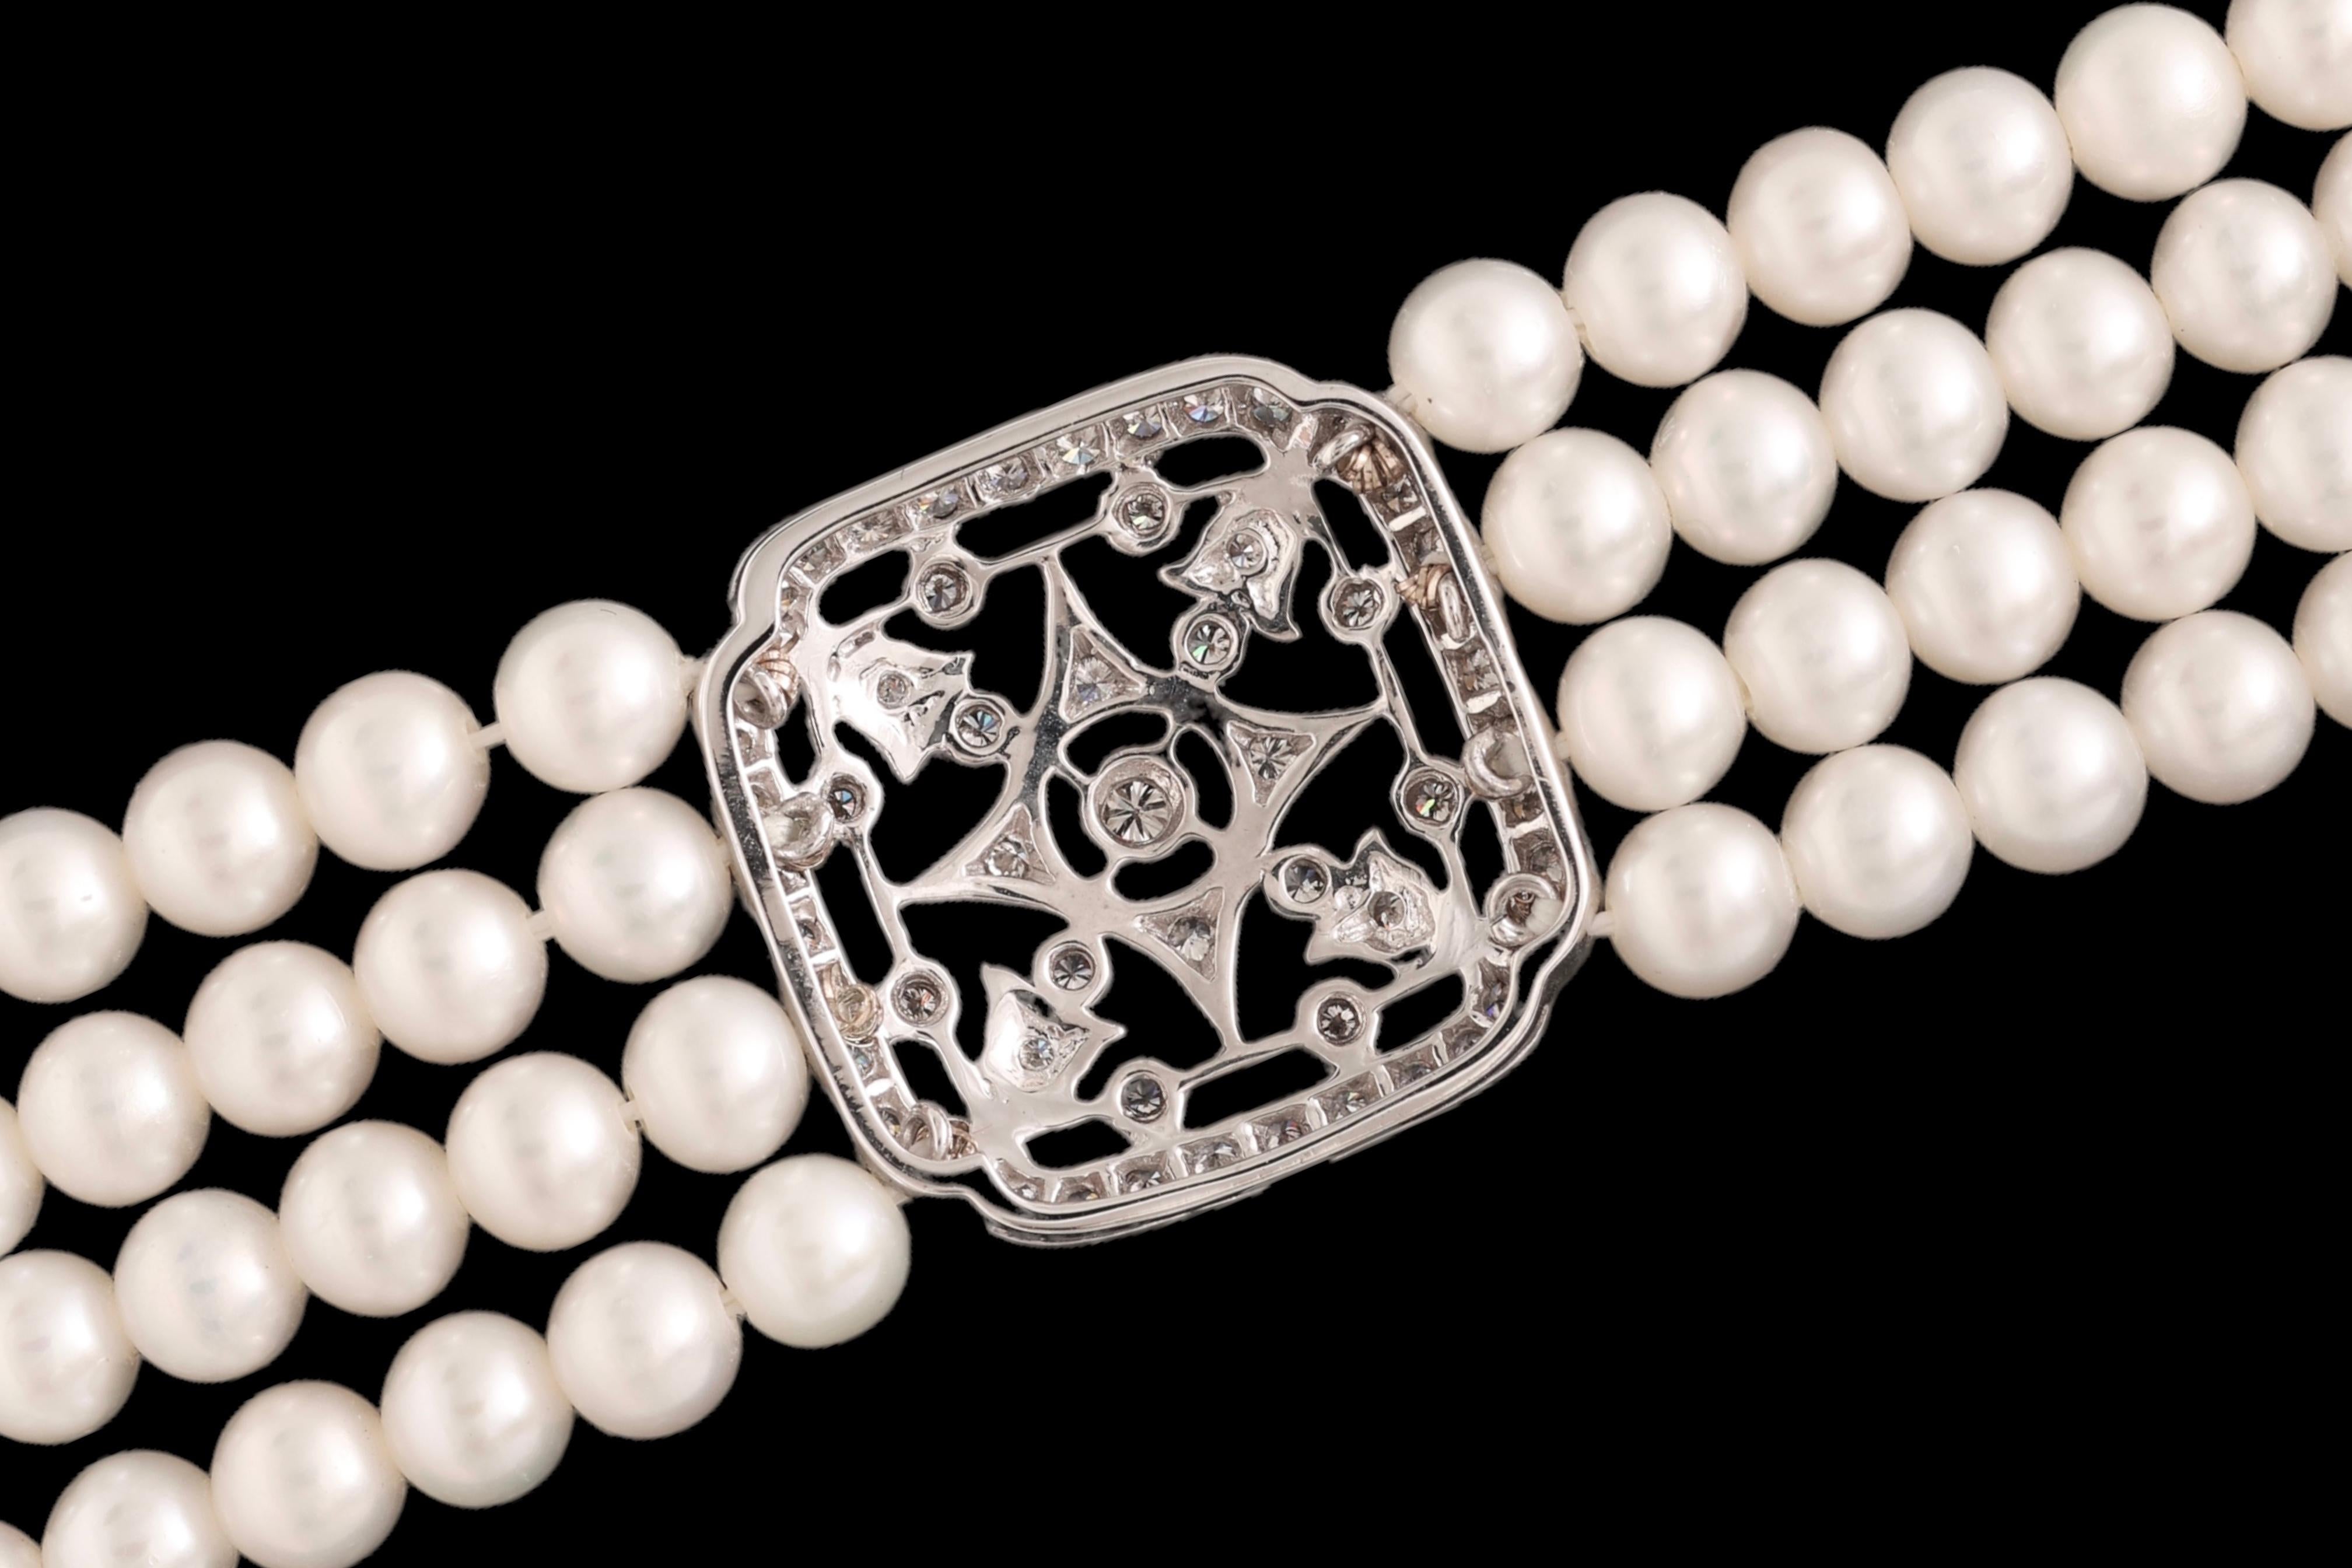 18 kt. White Gold Bracelet with 4 Rows of Pearls and 1.06 ct. Diamonds For Sale 1